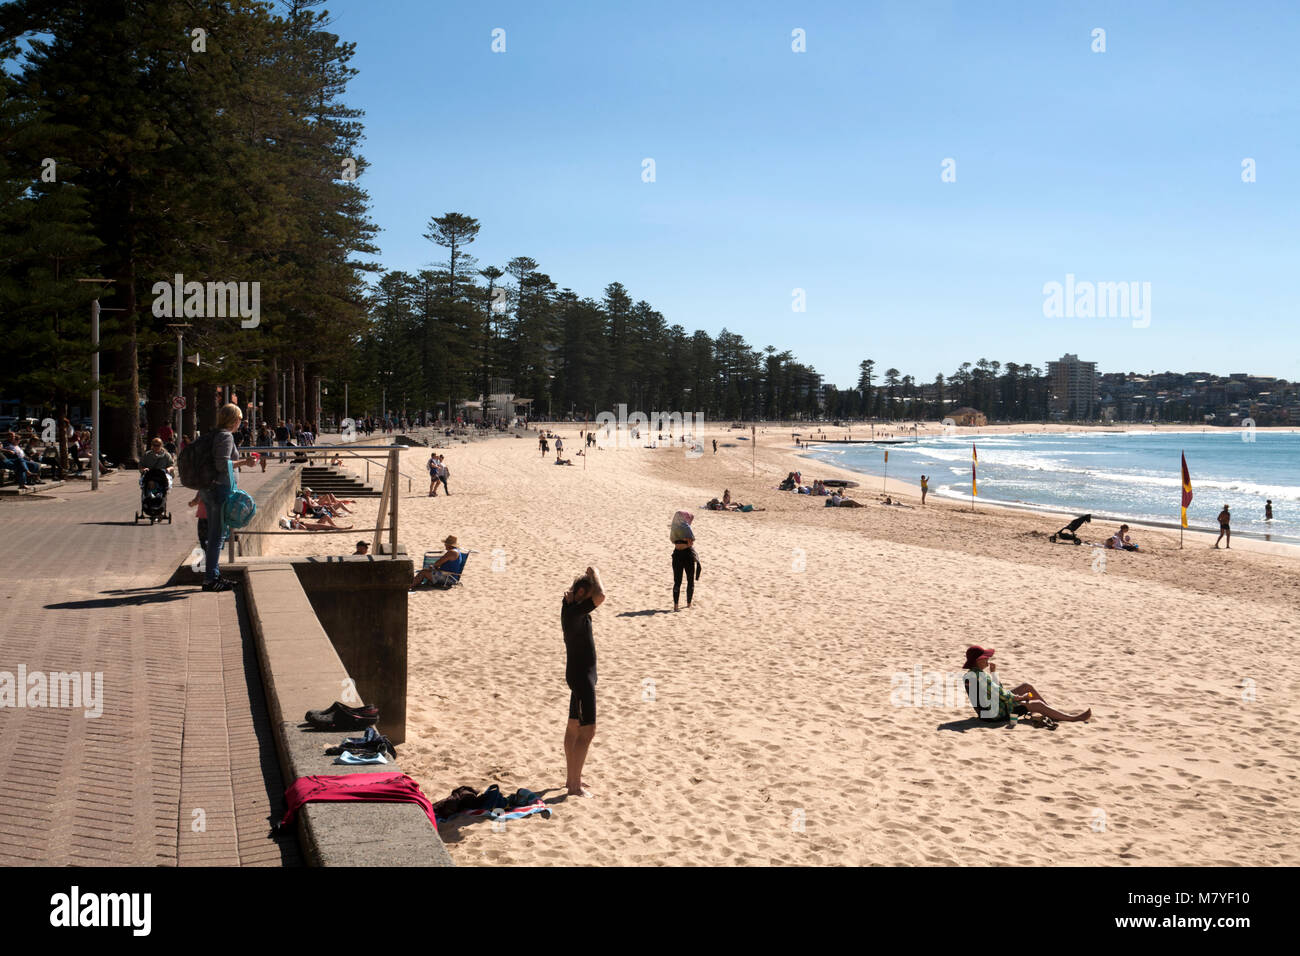 Manly Beach Manly Sydney New South Wales, Australien Stockfoto